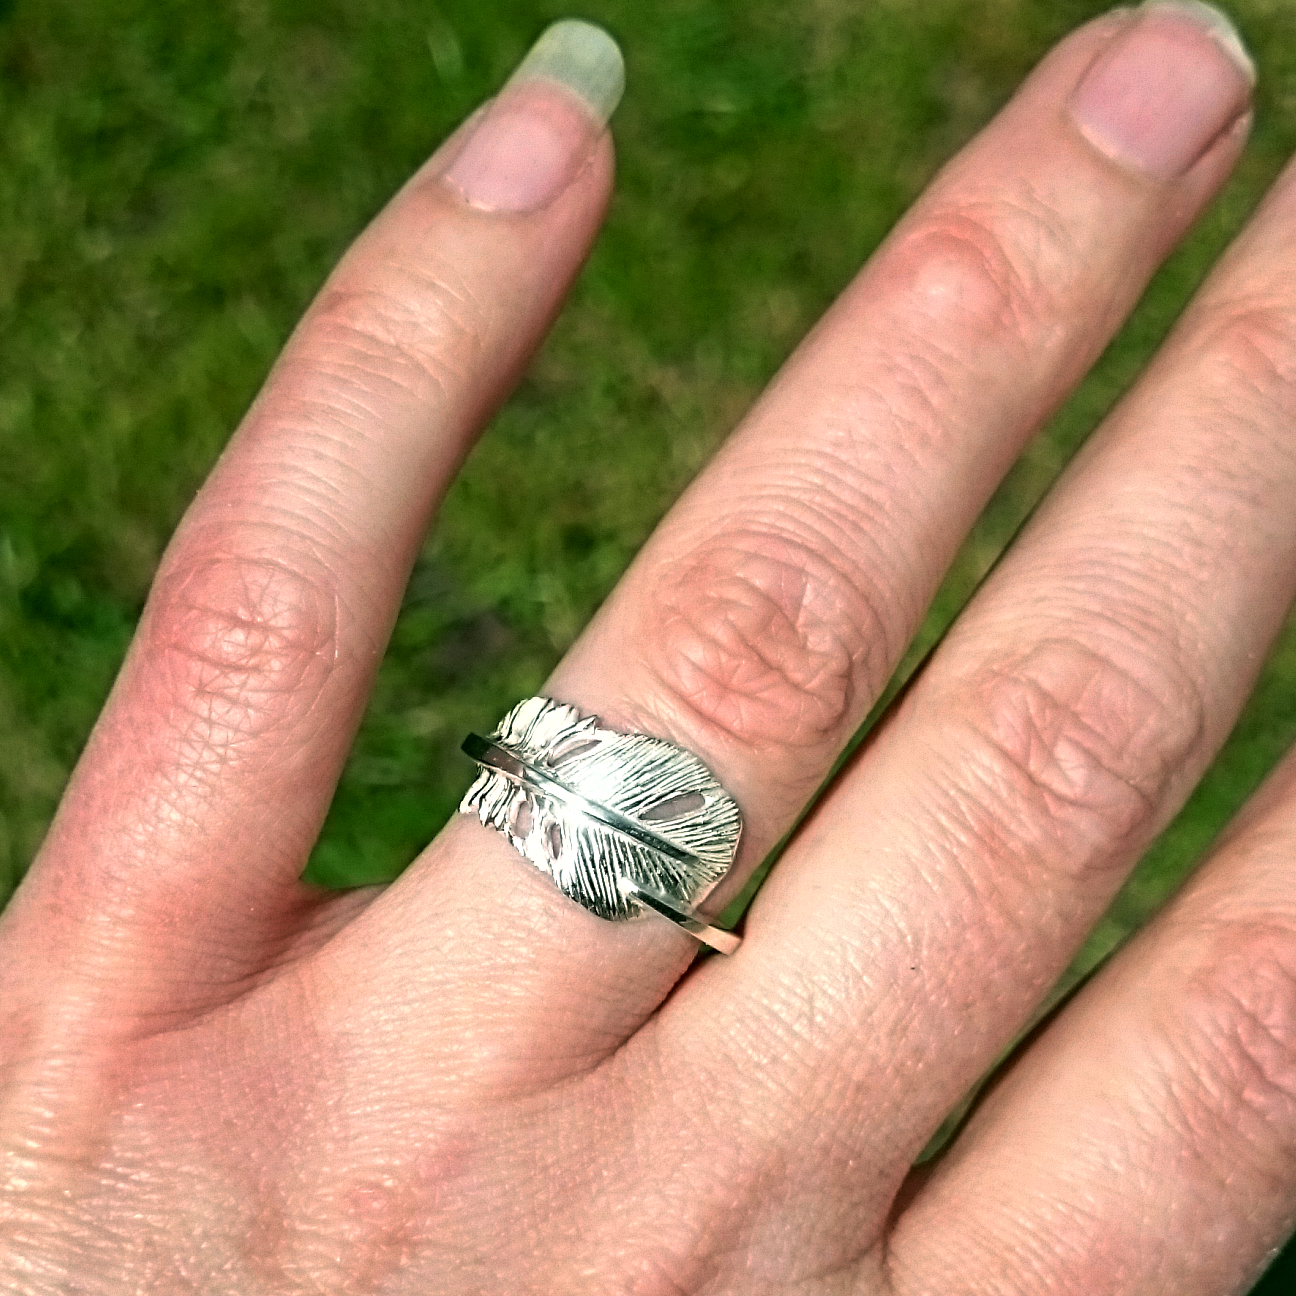 "Cherish" is a sterling silver angel feather ring. Irish handmade jewellery by Elena Brennan made in Cavan Ireland. Part of the My Angel jewellery collection.